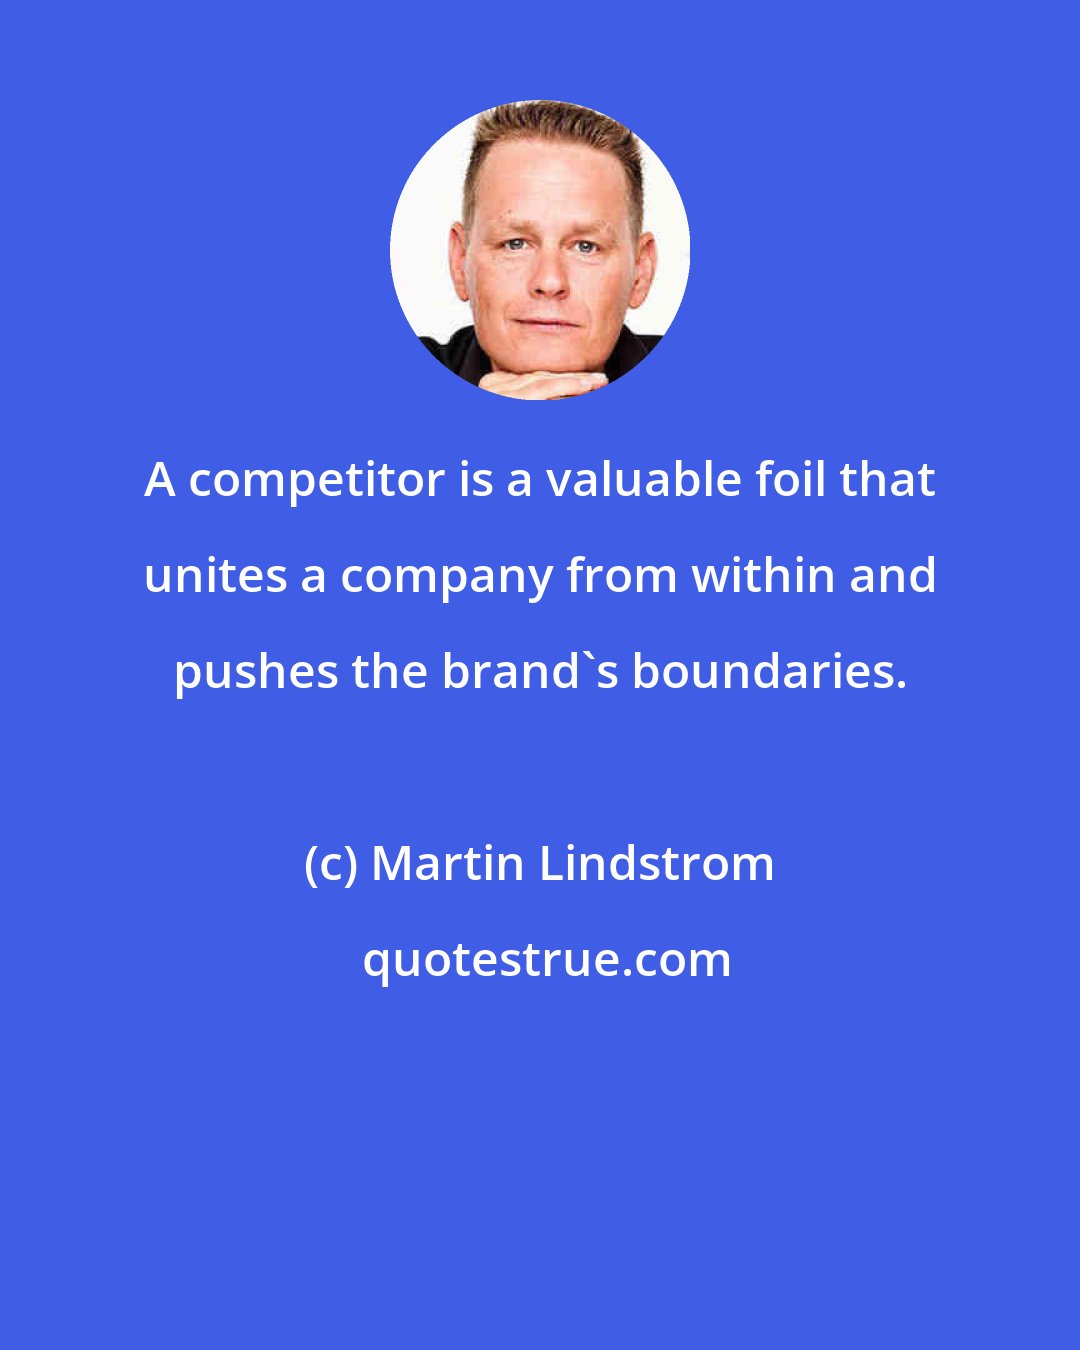 Martin Lindstrom: A competitor is a valuable foil that unites a company from within and pushes the brand's boundaries.